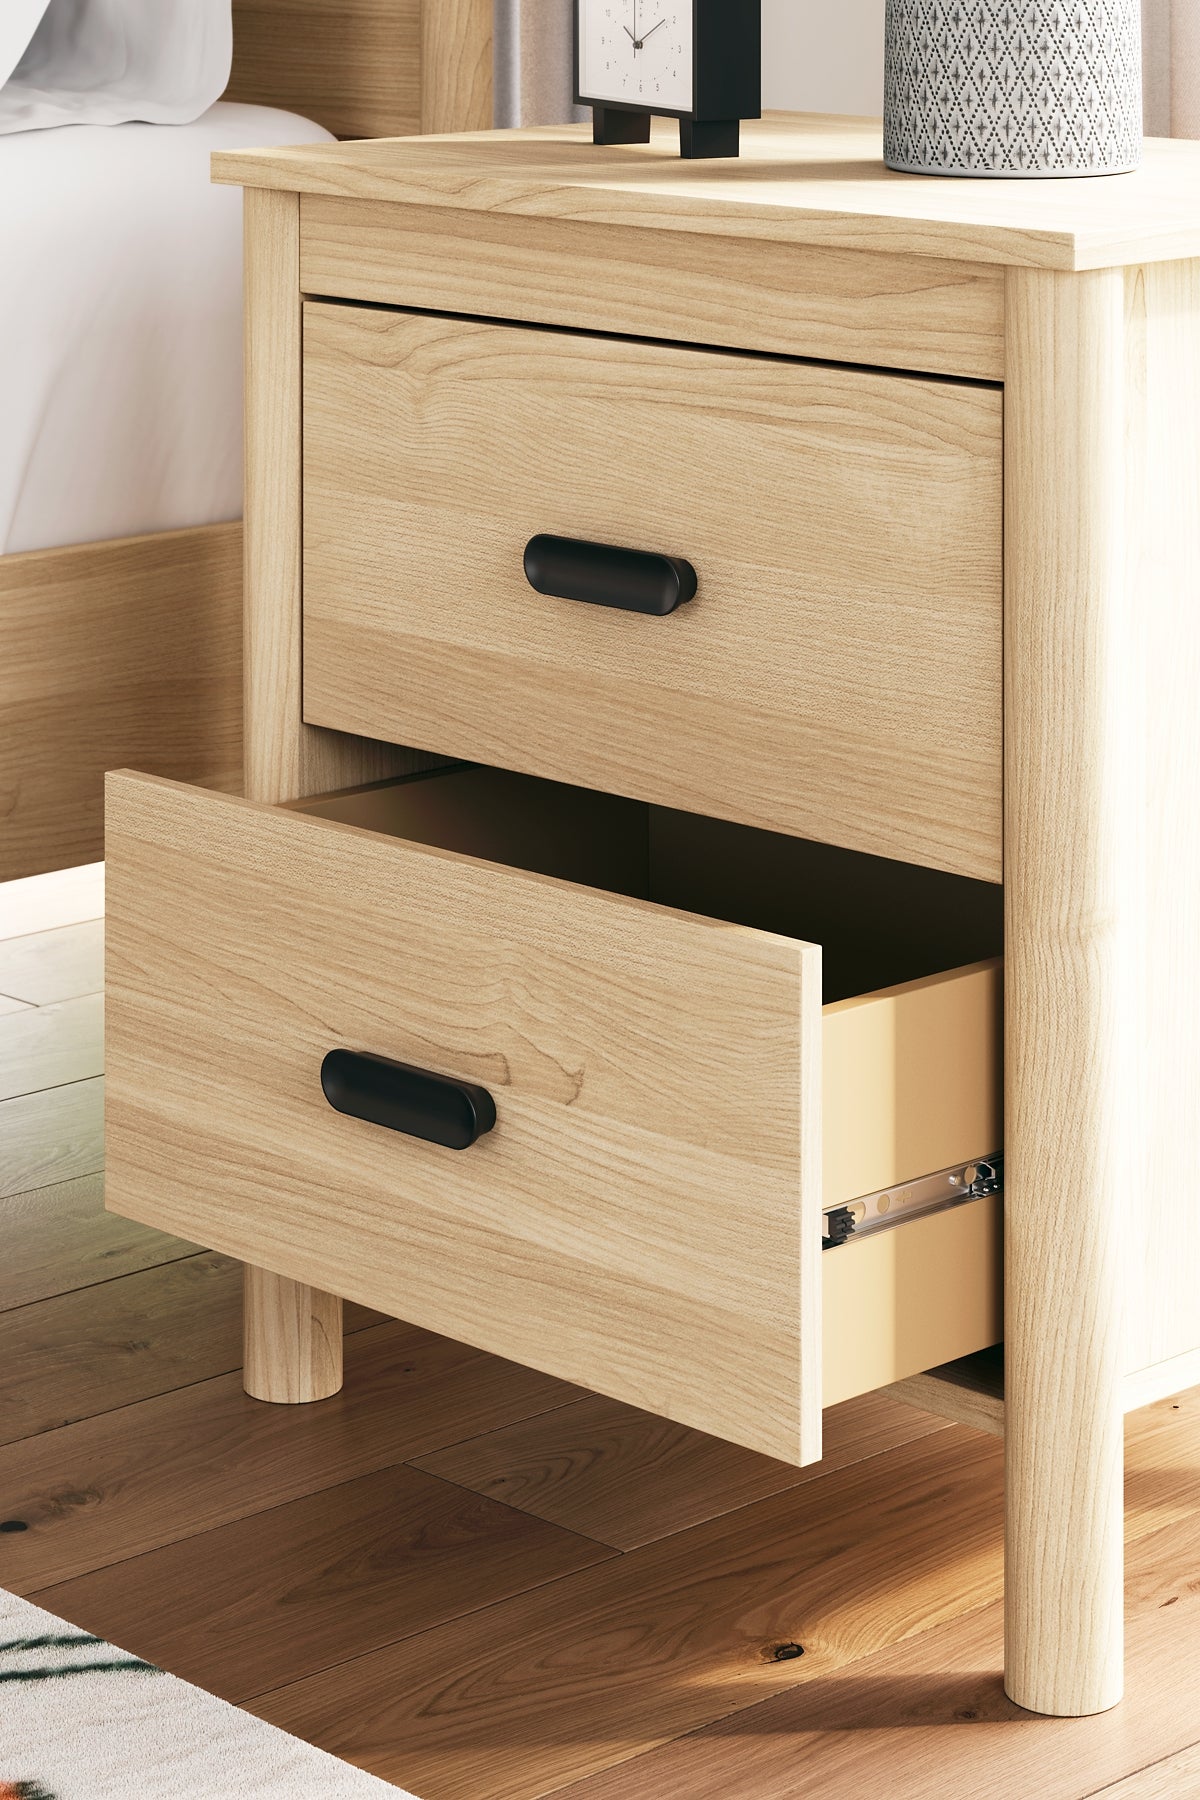 Cabinella Two Drawer Night Stand Signature Design by Ashley®